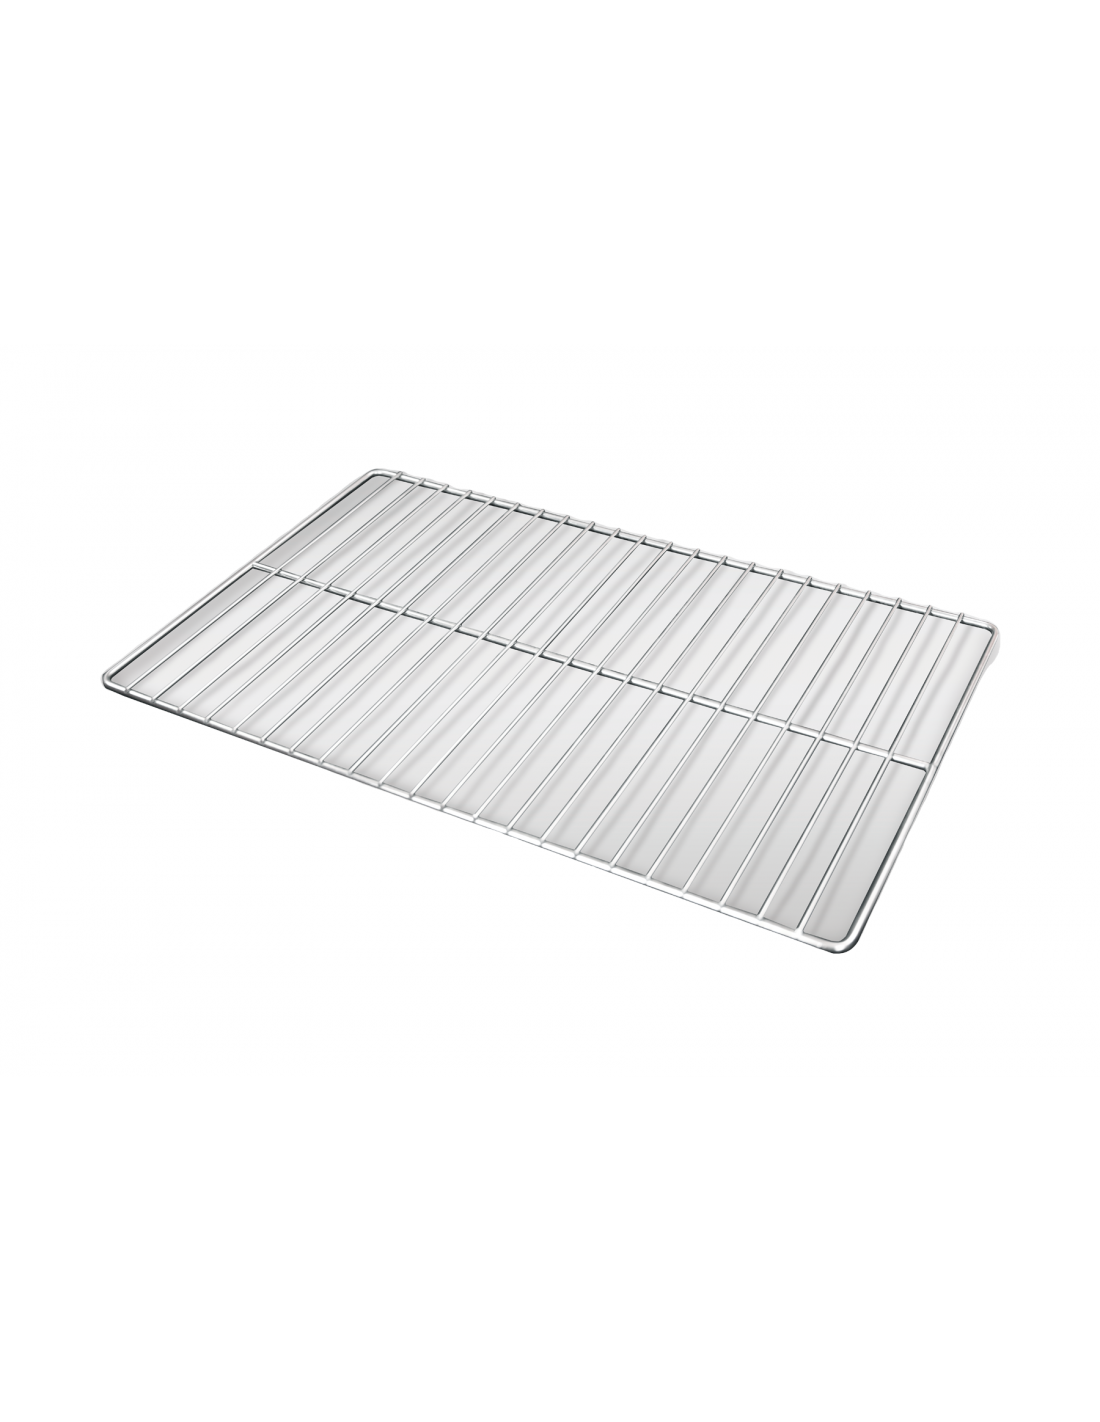 GN 1/1 stainless steel grill